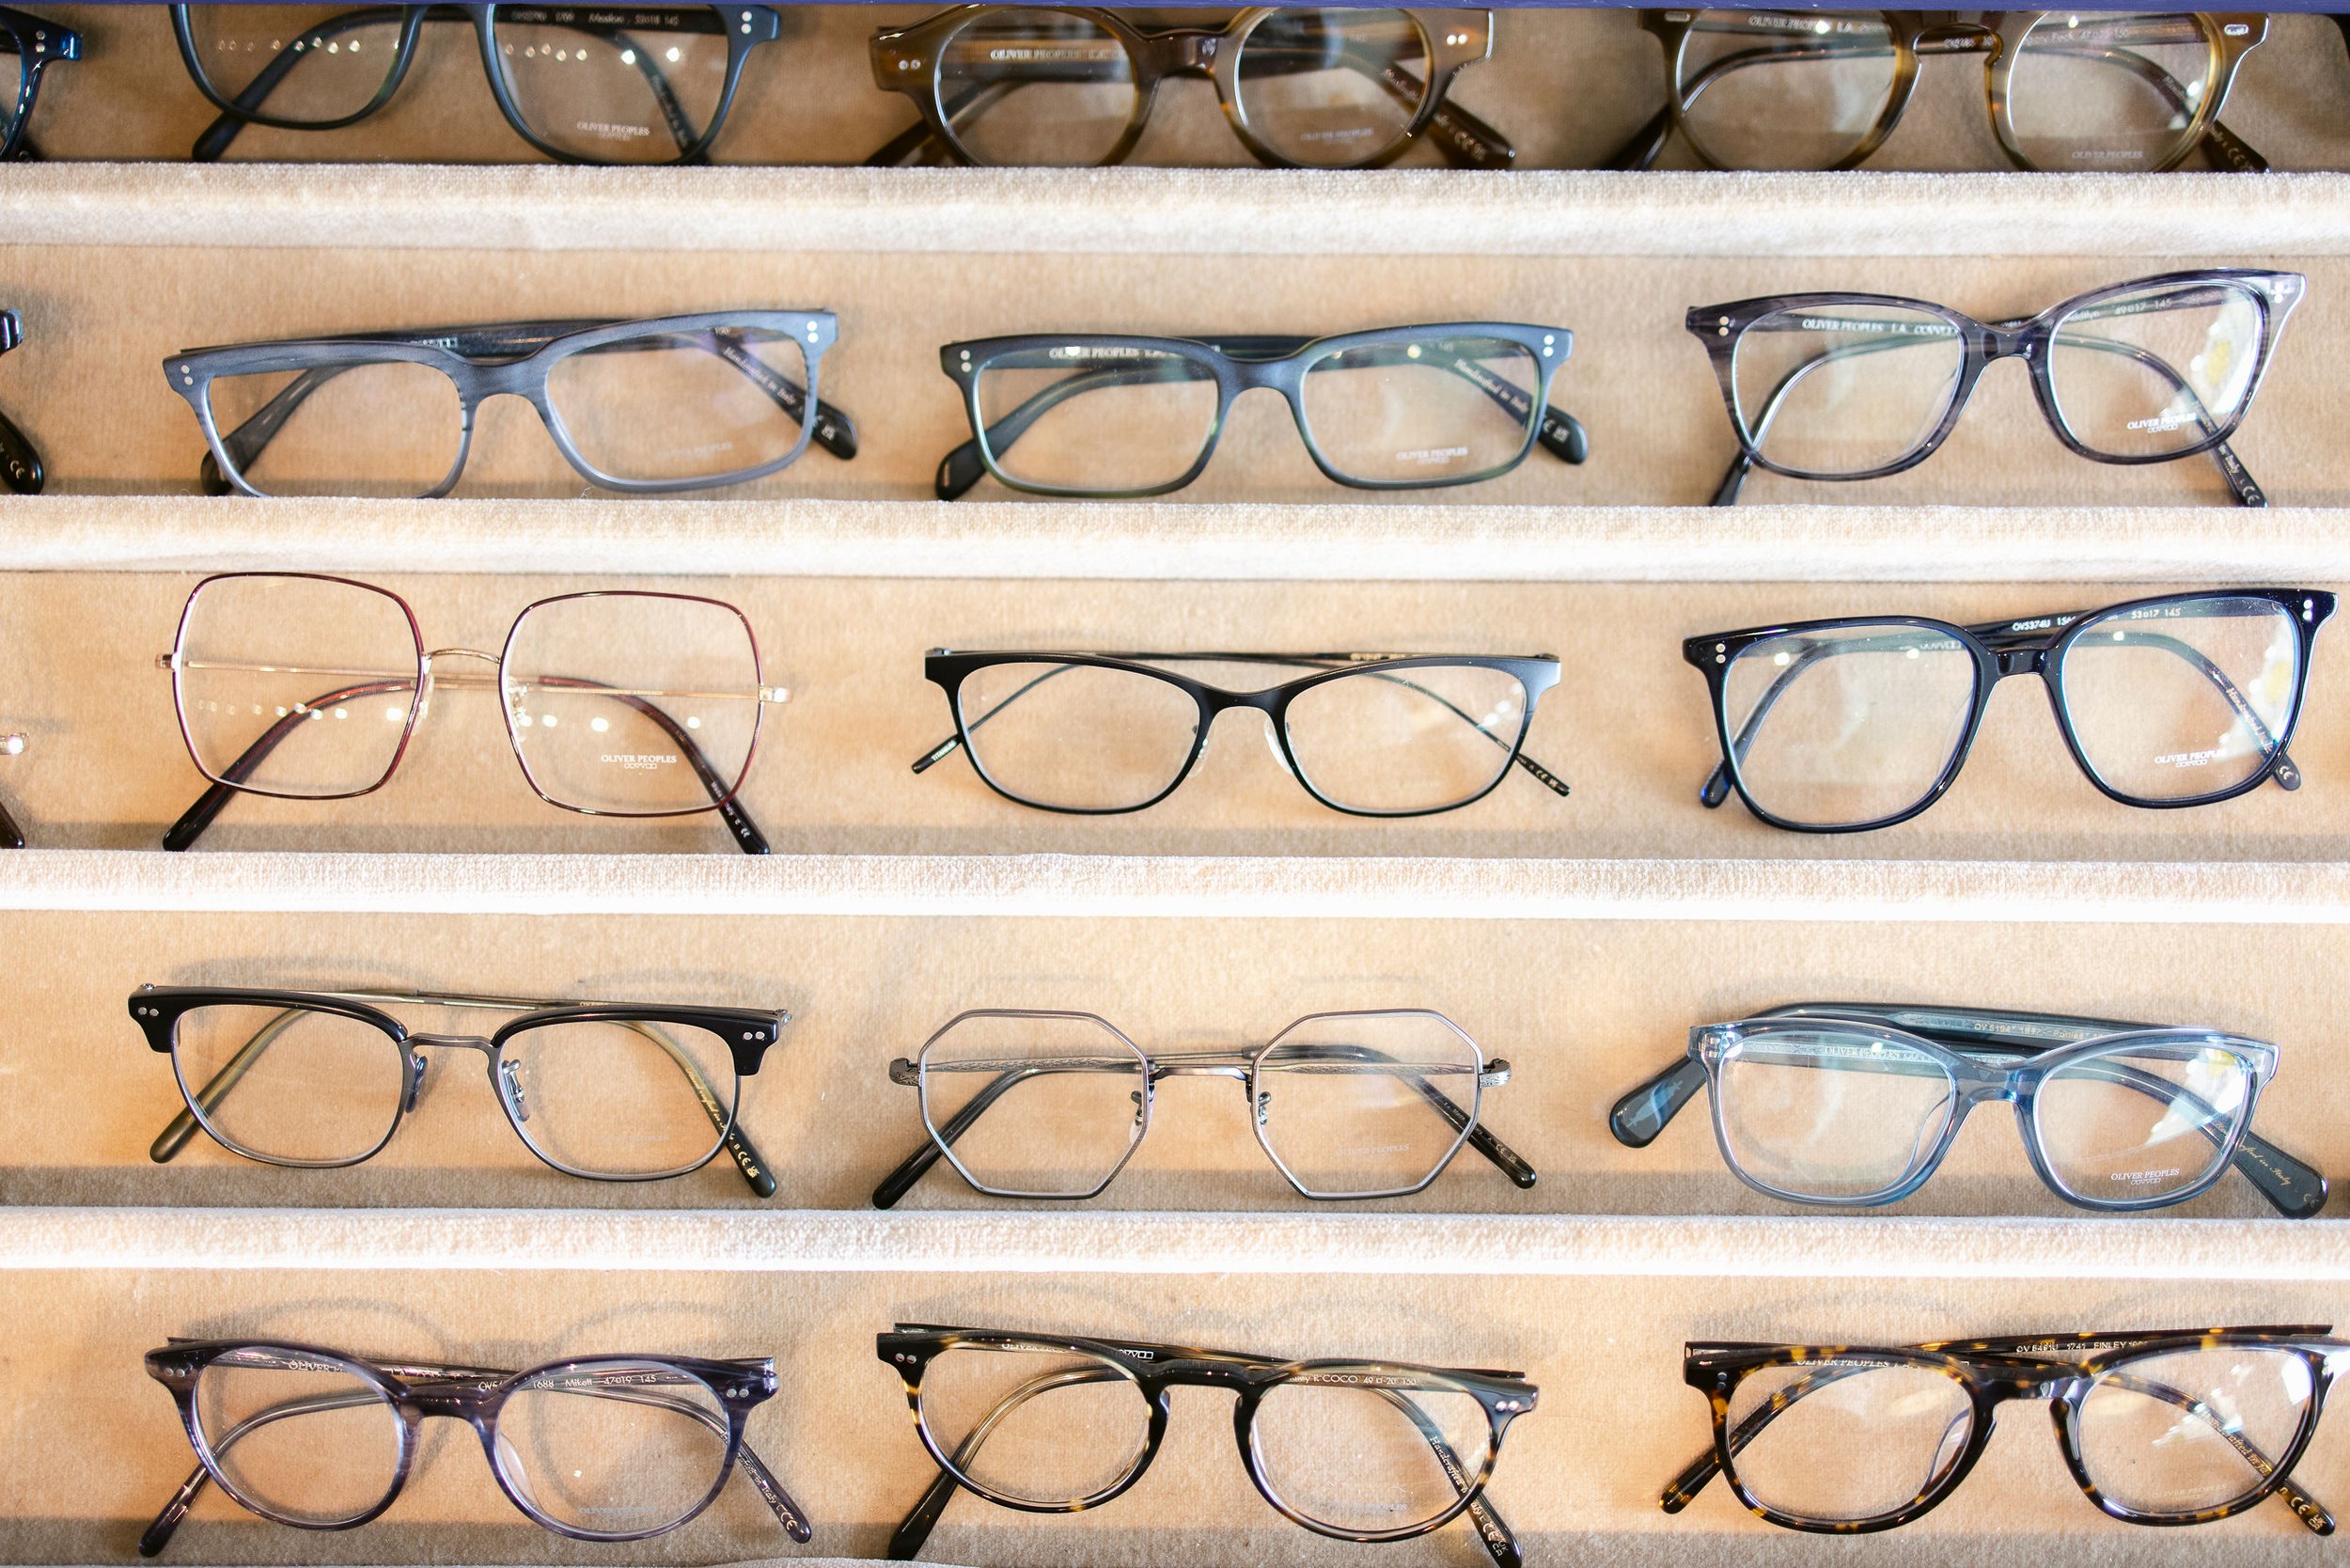   Our cabinets are filled with unique eyewear   Preview some of our adult frames below 